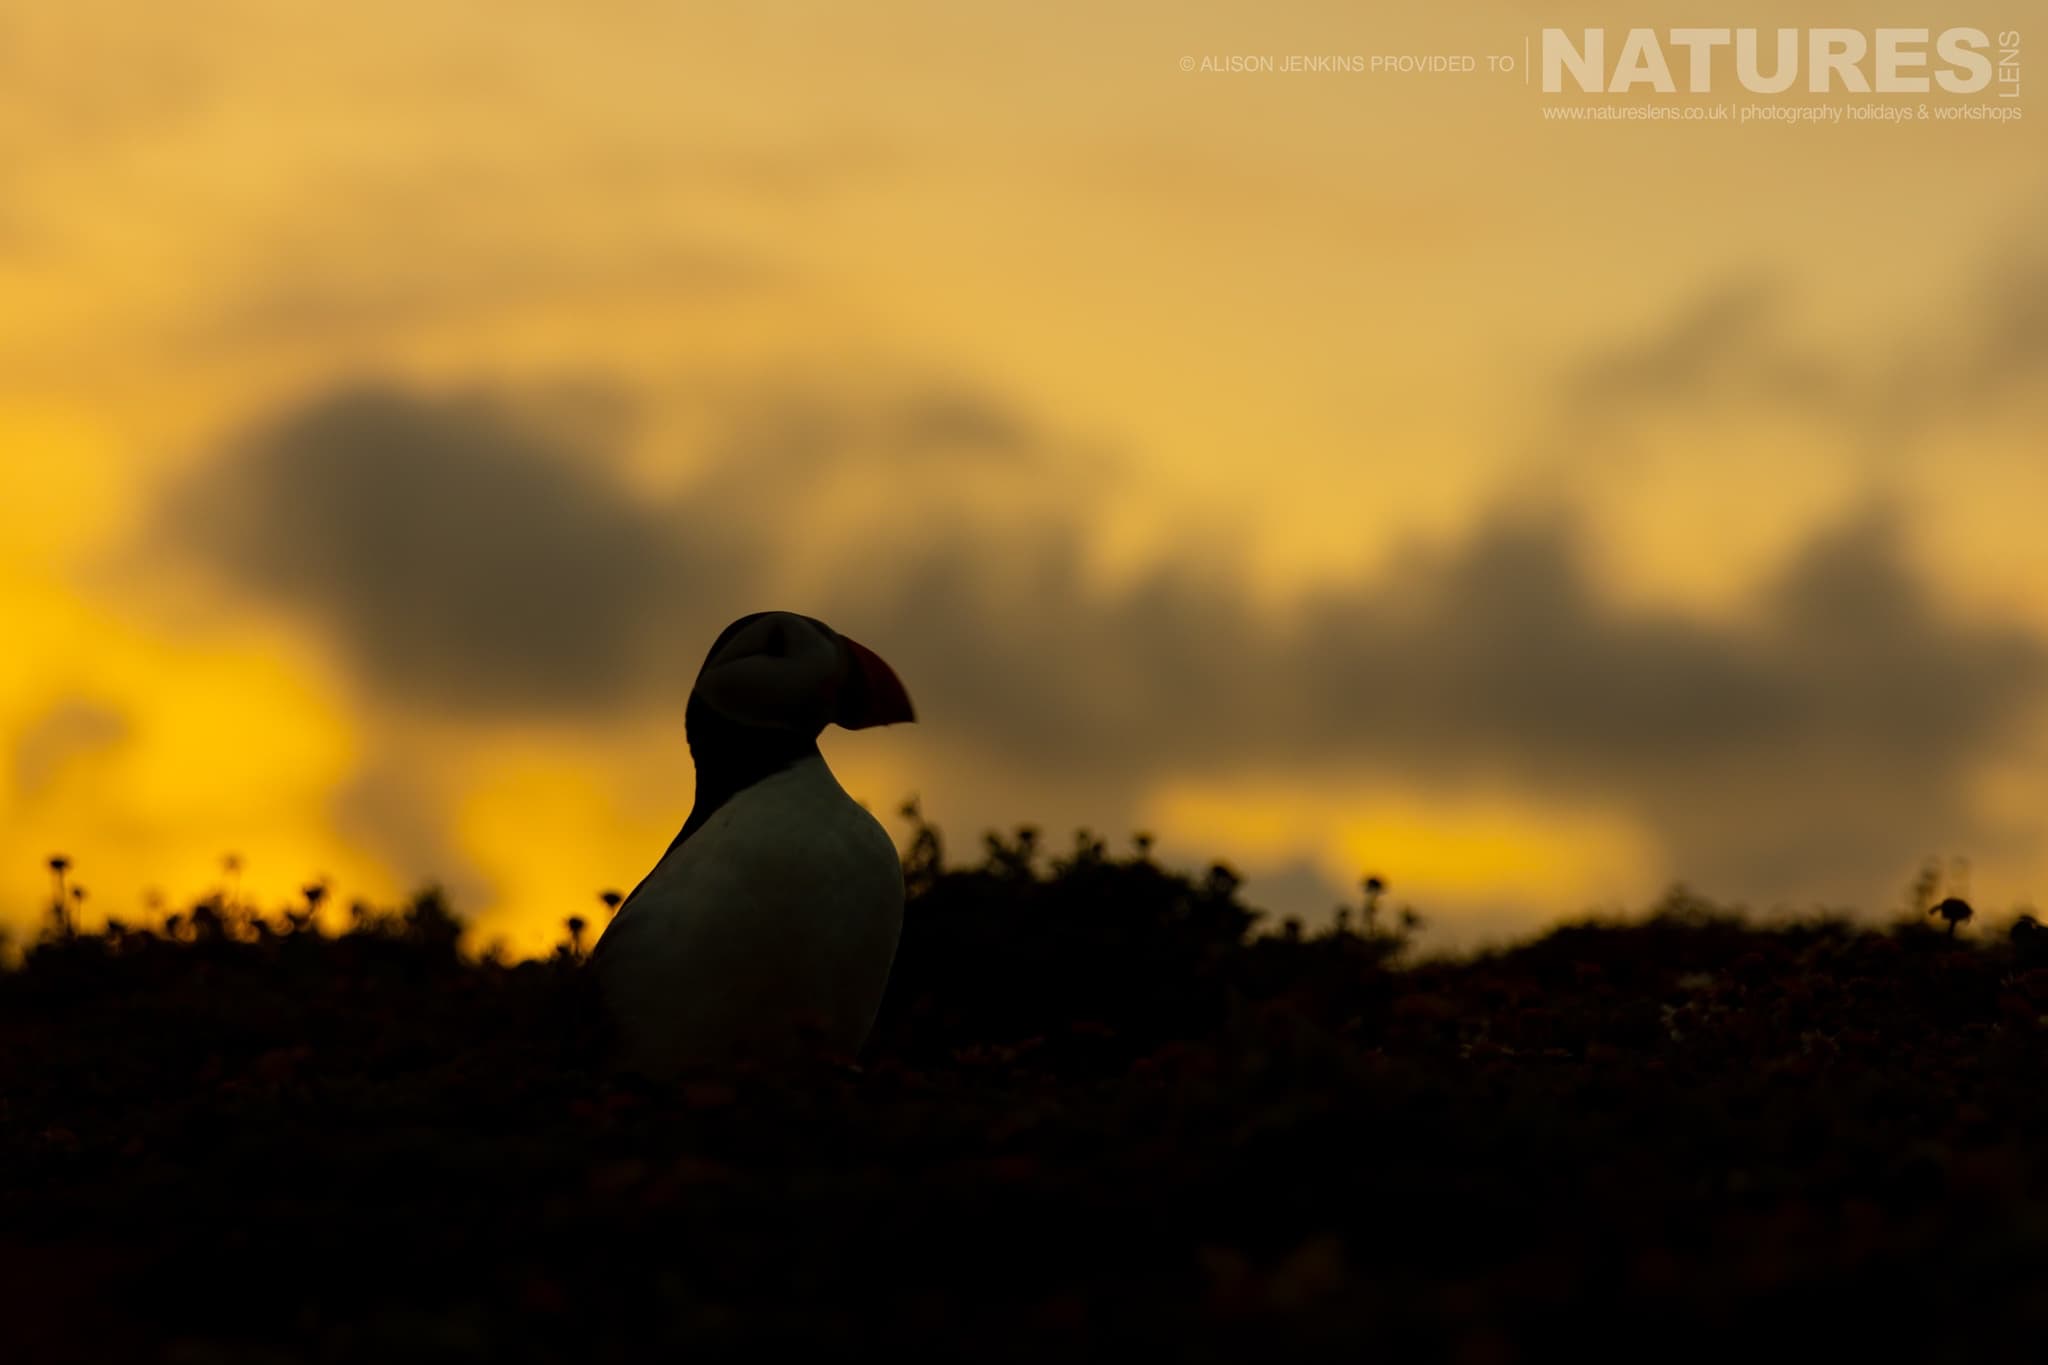 One Of The Puffins Of Skomer With A Moody Evening Sky Behind Photographed On Skomer Island